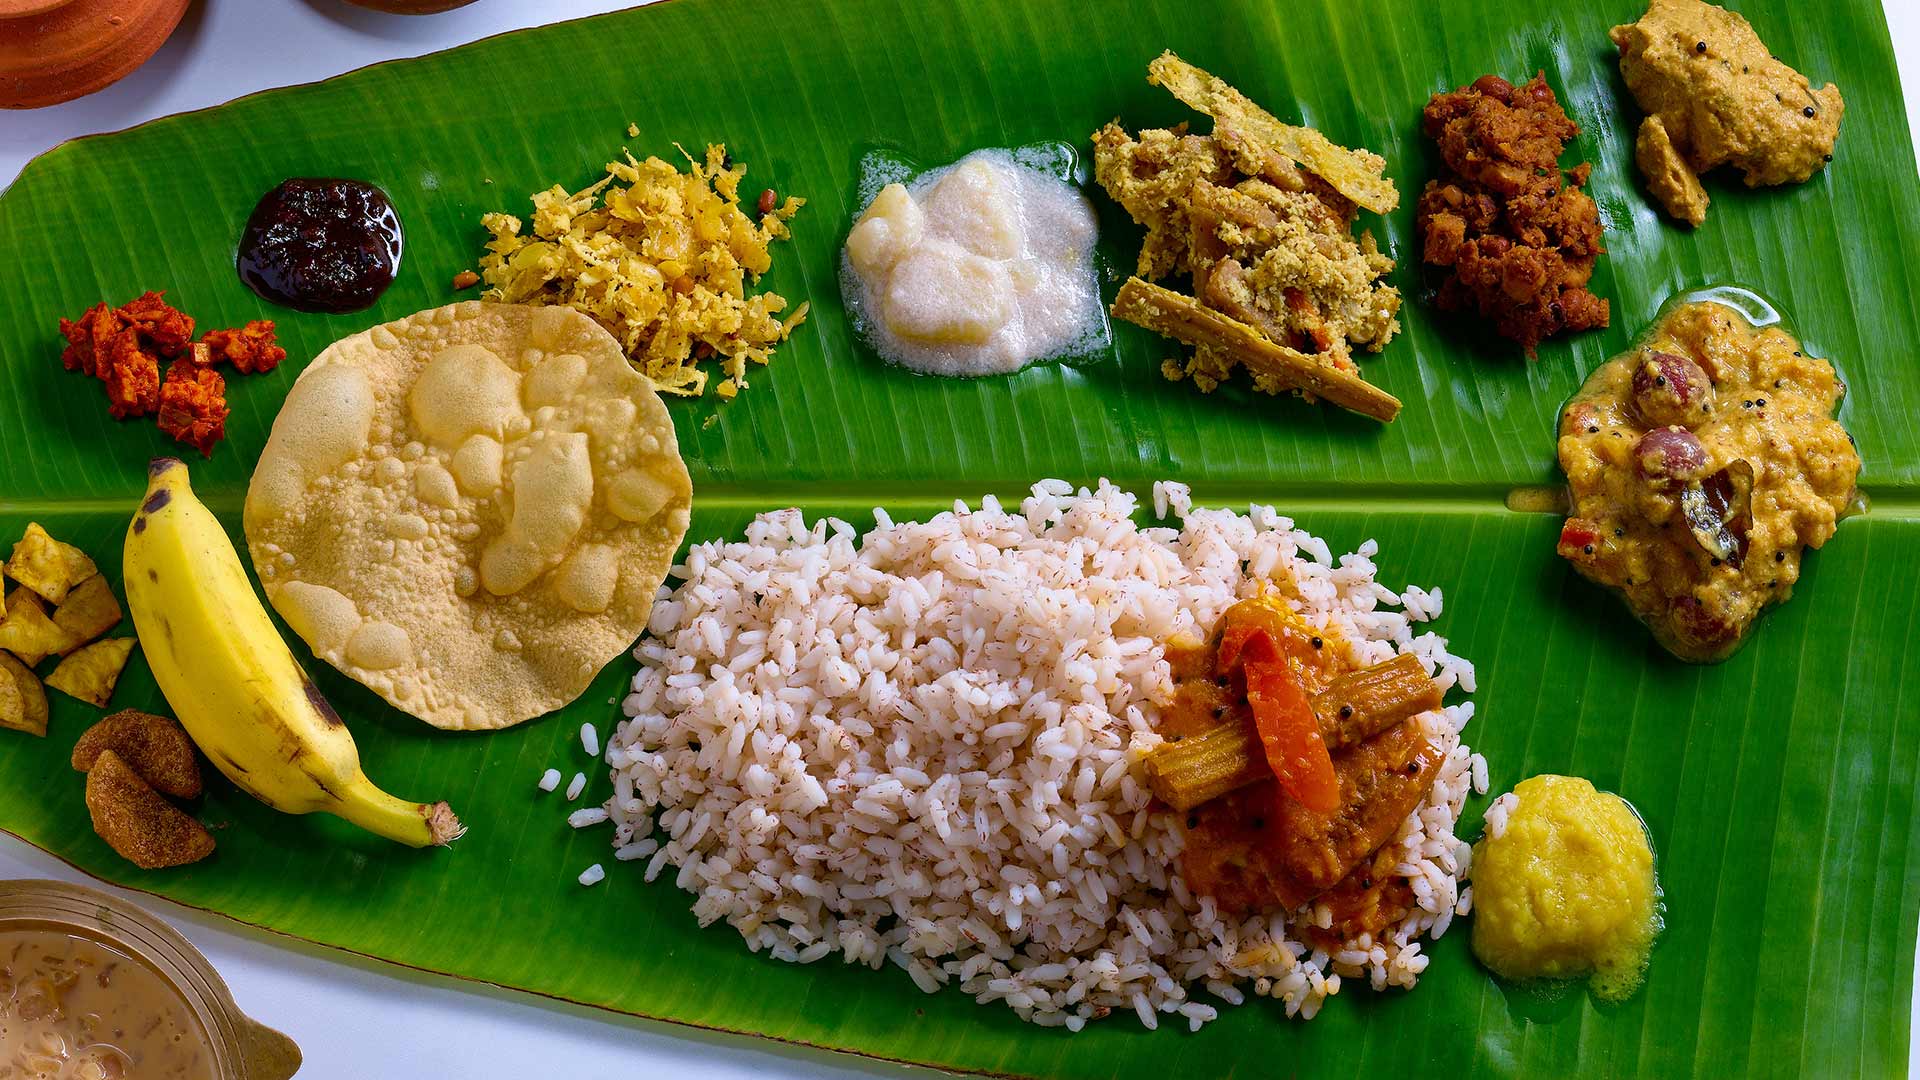 The Much Loved Foods Of Kerala And Tasty Recipes - Part 1 - Farmizen